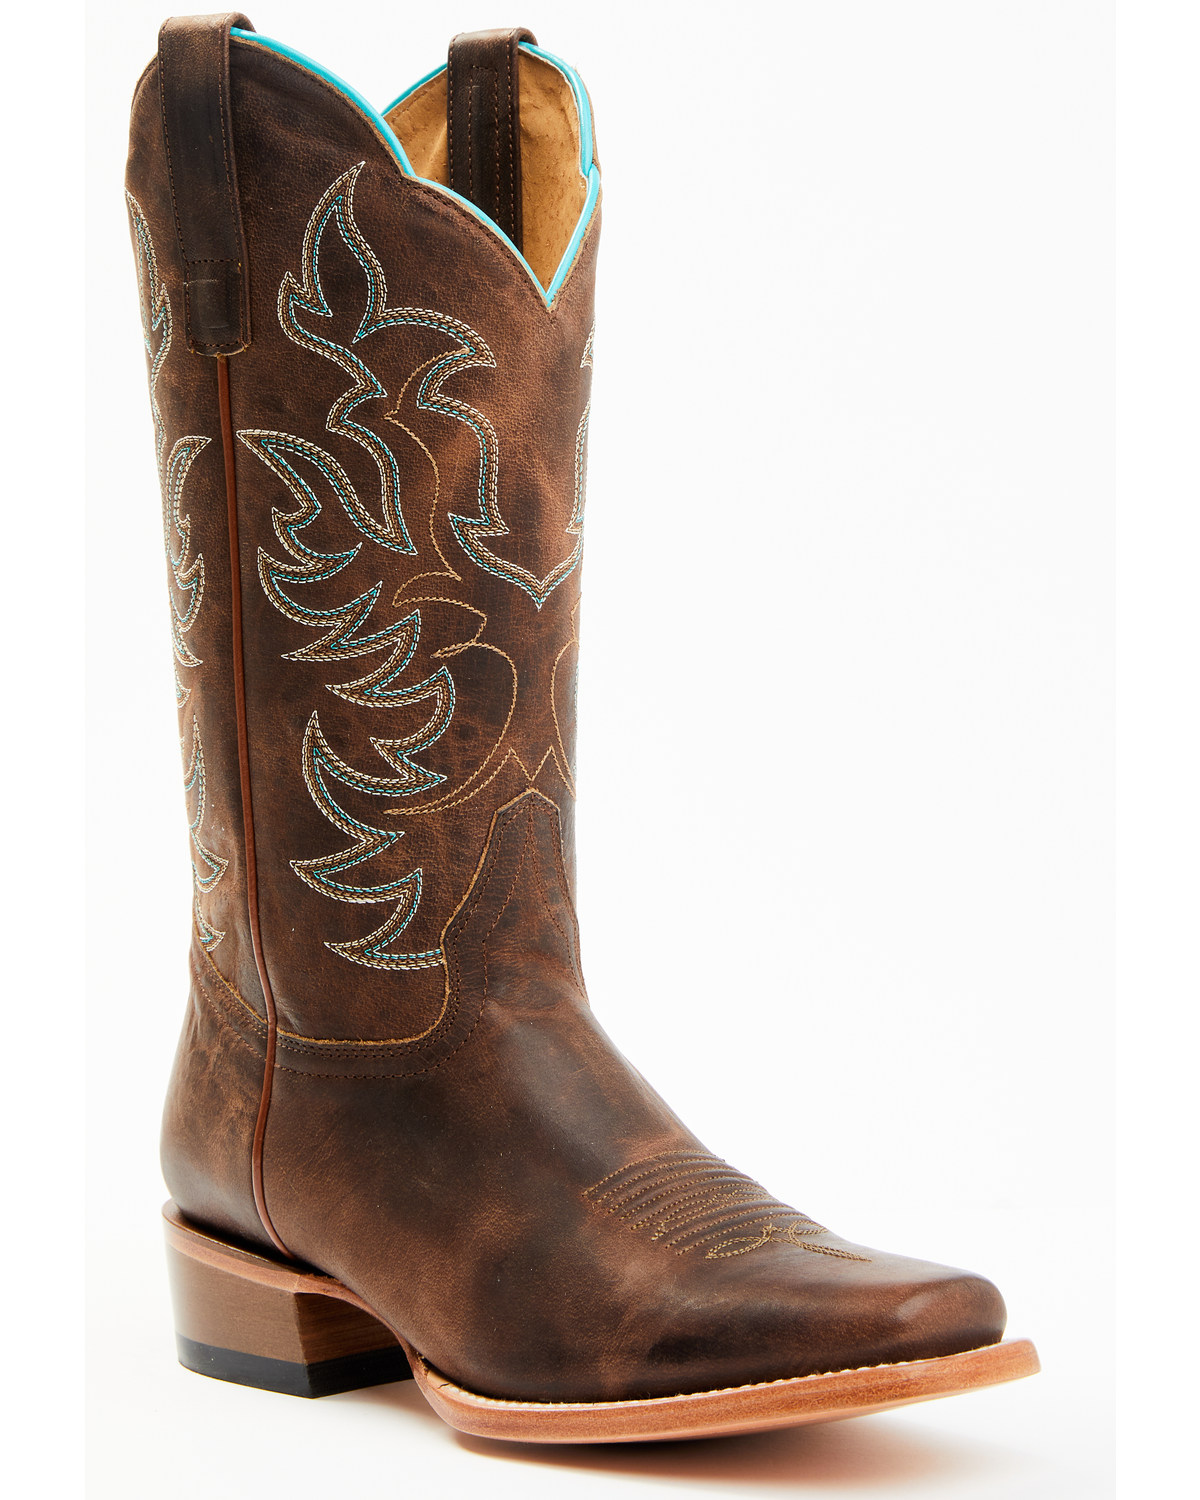 Shyanne Women's Cassidy Combo Western Boots - Square Toe